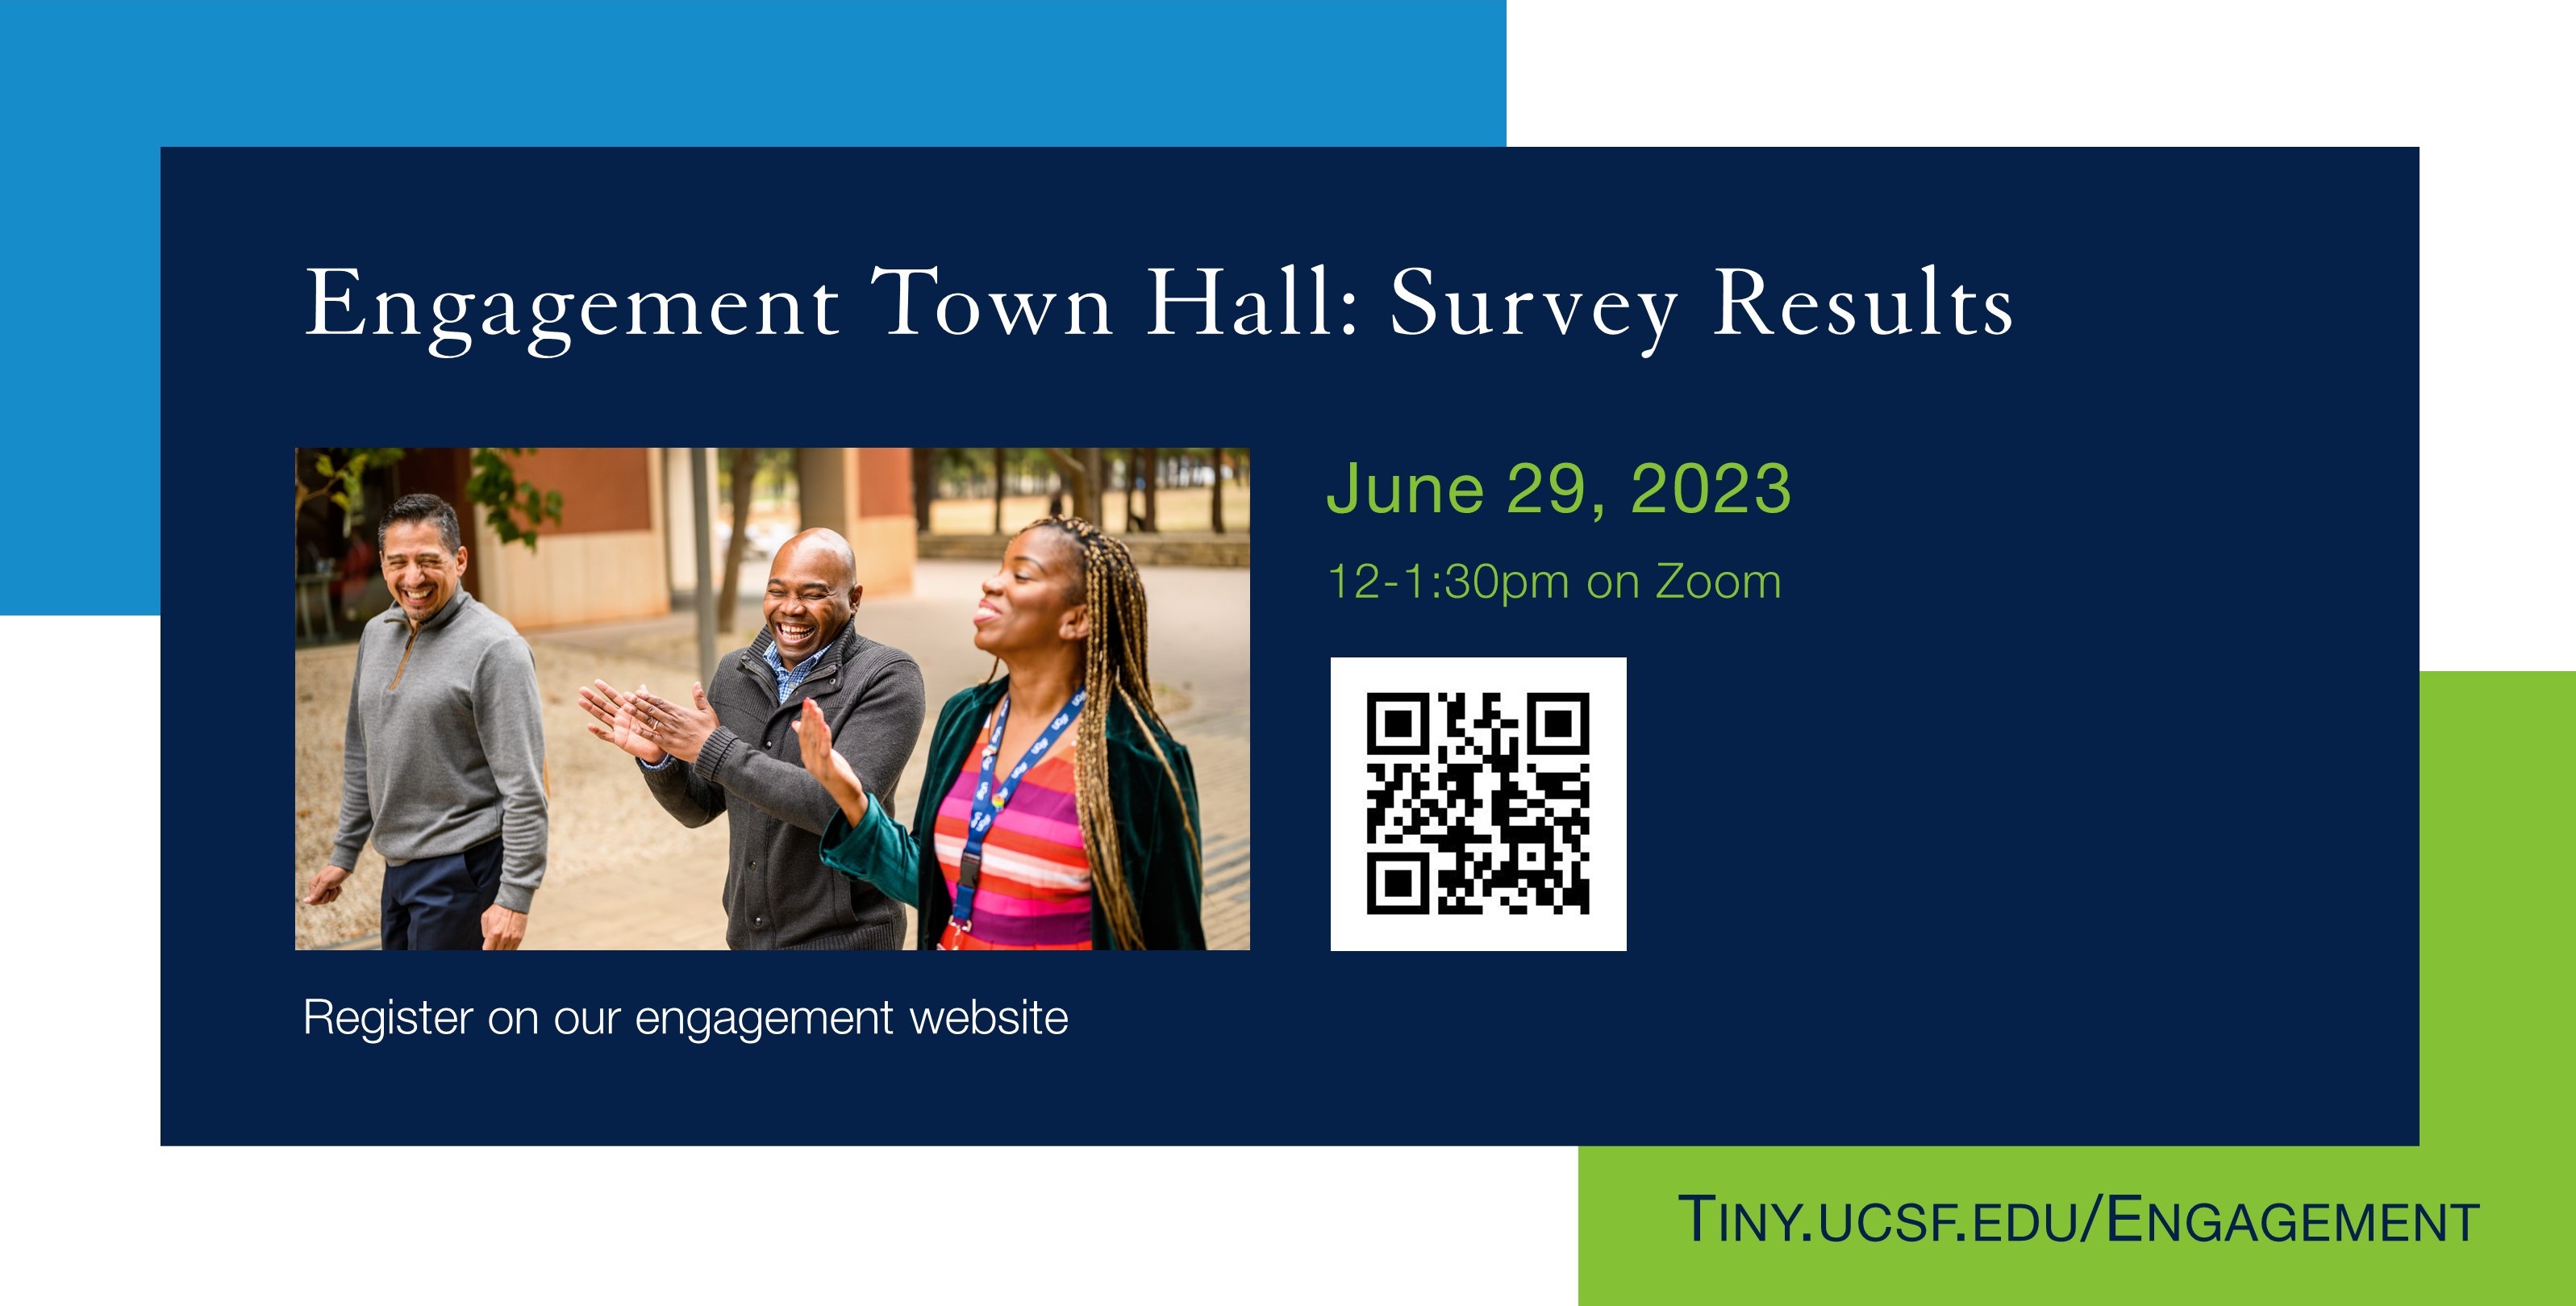 Engagement Town Hall: Survey Results: June 29, 2023, 12-1:30pm, Virtual Zoom Event, Register on our Engagement website tiny.ucsf.edu/engagement